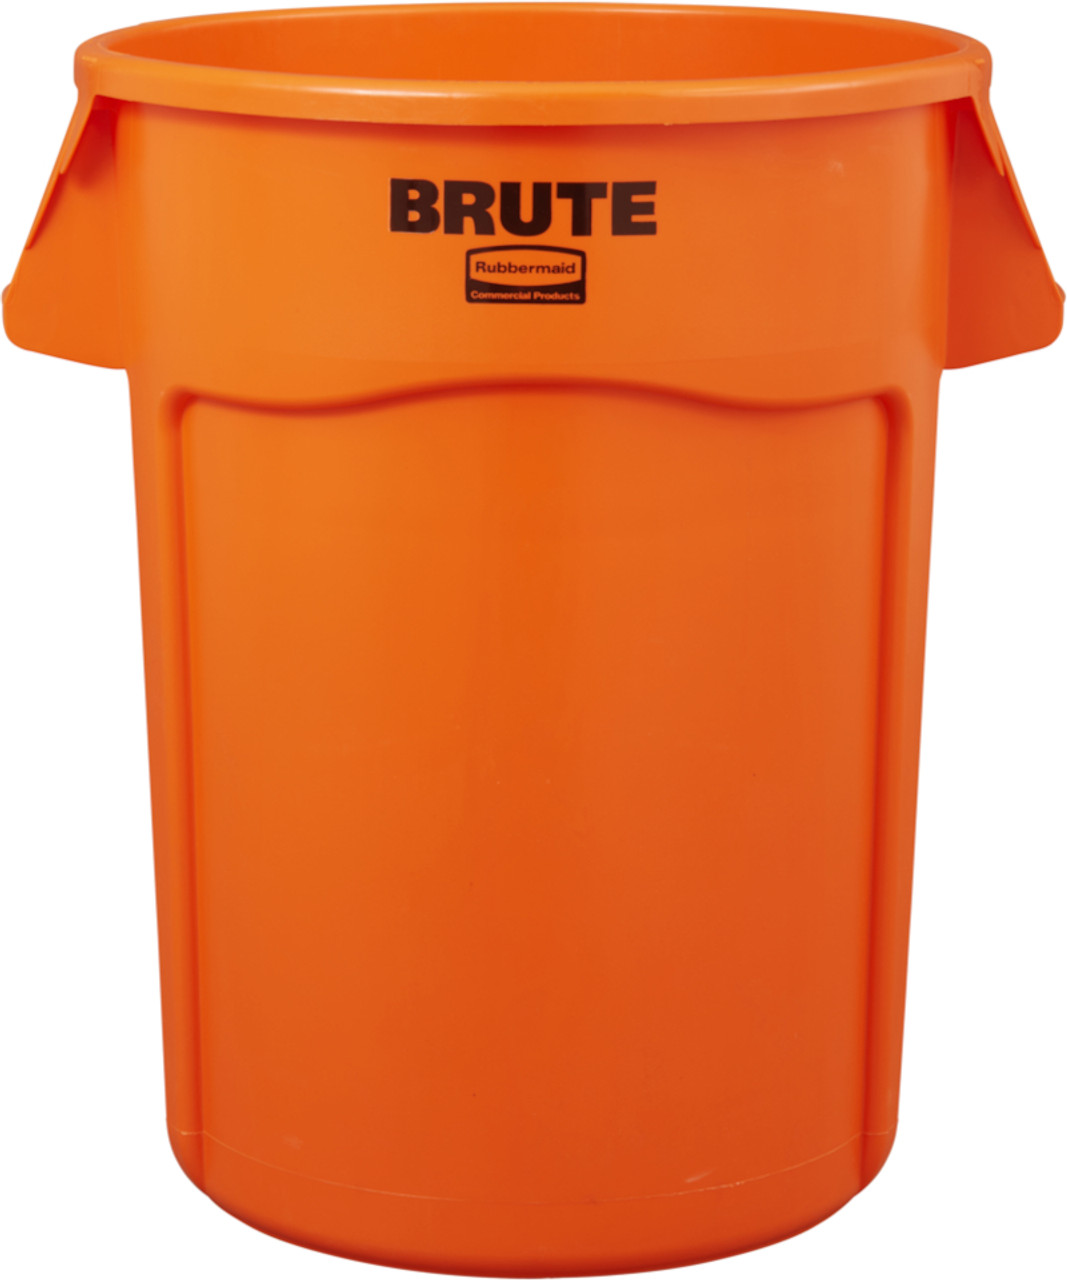 Rubbermaid Commercial Products FG9W8700YEL BRUTE Trash Can Caddy